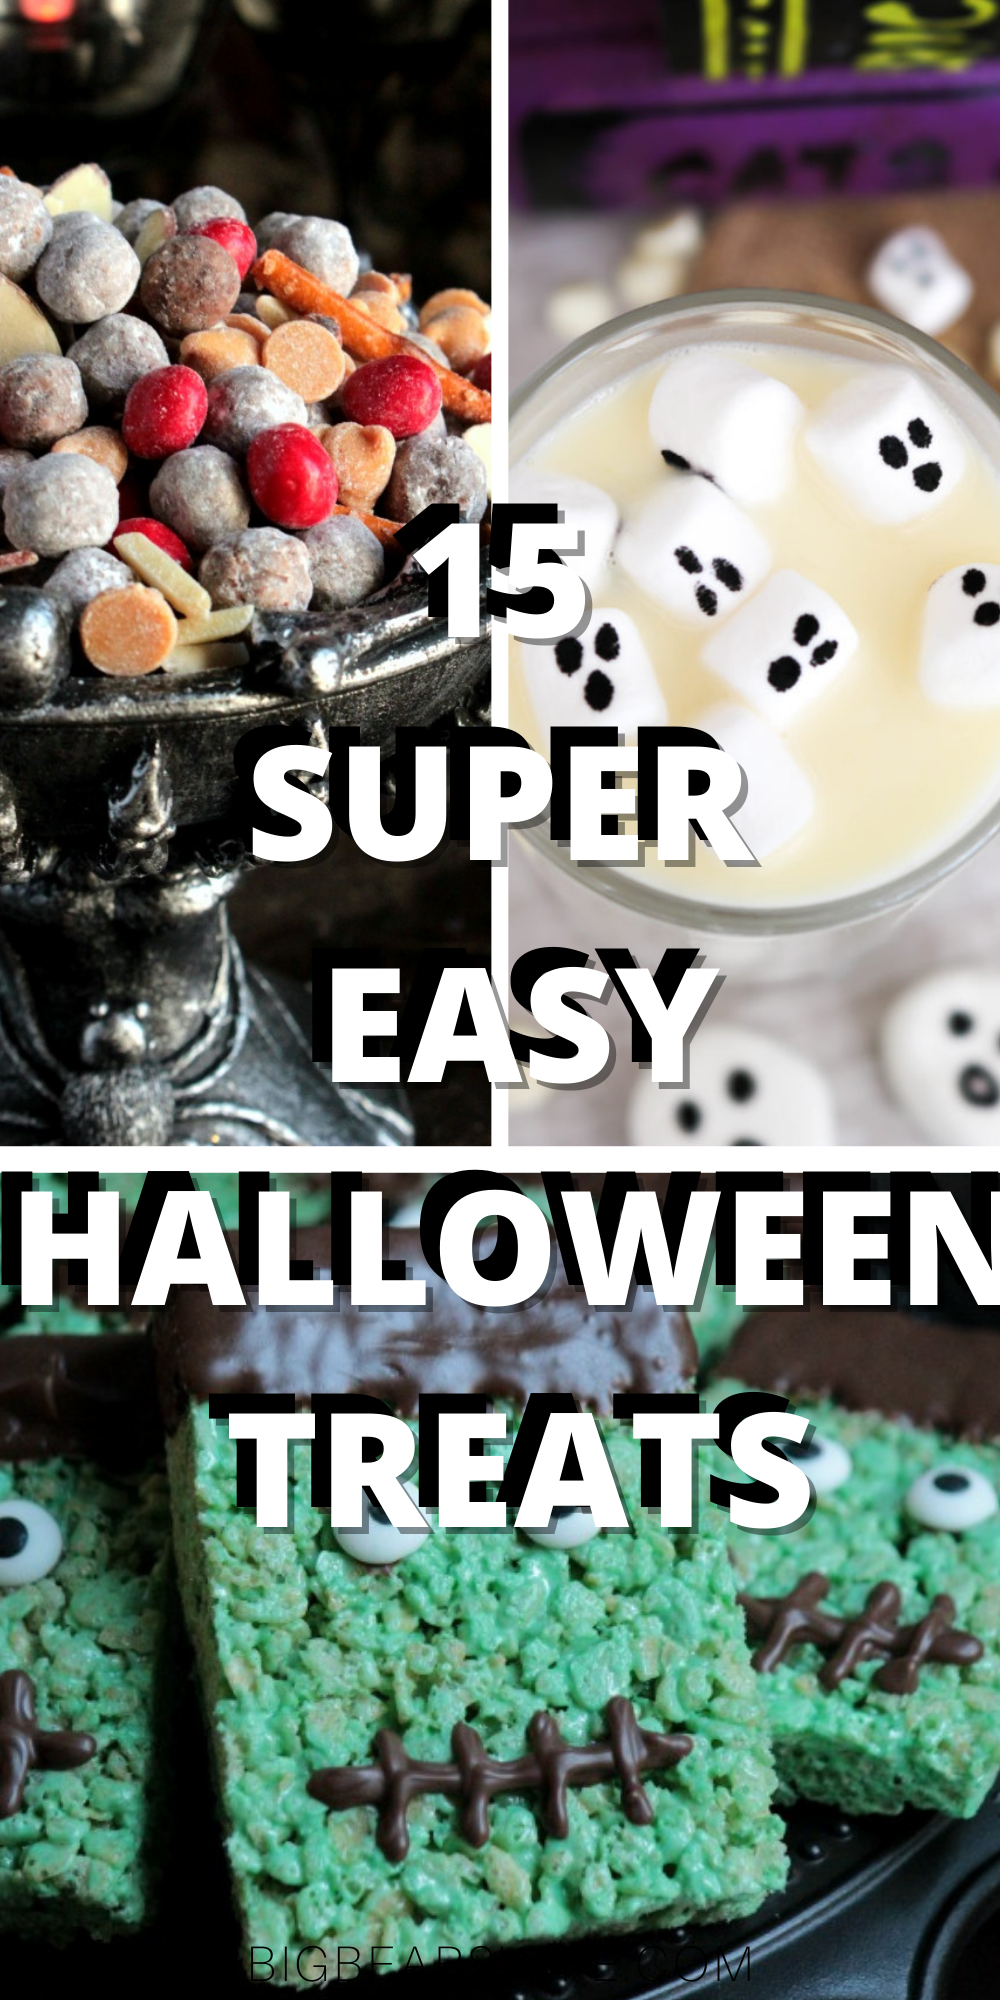 15 SUPER EASY HALLOWEEN TREATS - If you want to make some great Halloween desserts and Halloween treats without spending a ton of time in the kitchen you'll want this list of 15 Super Easy Halloween Treats recipes! No bake eclairs, apple slices, sheet cakes and more are easily transformed into Halloween desserts without any fuss or witchy magic!  via @bigbearswife